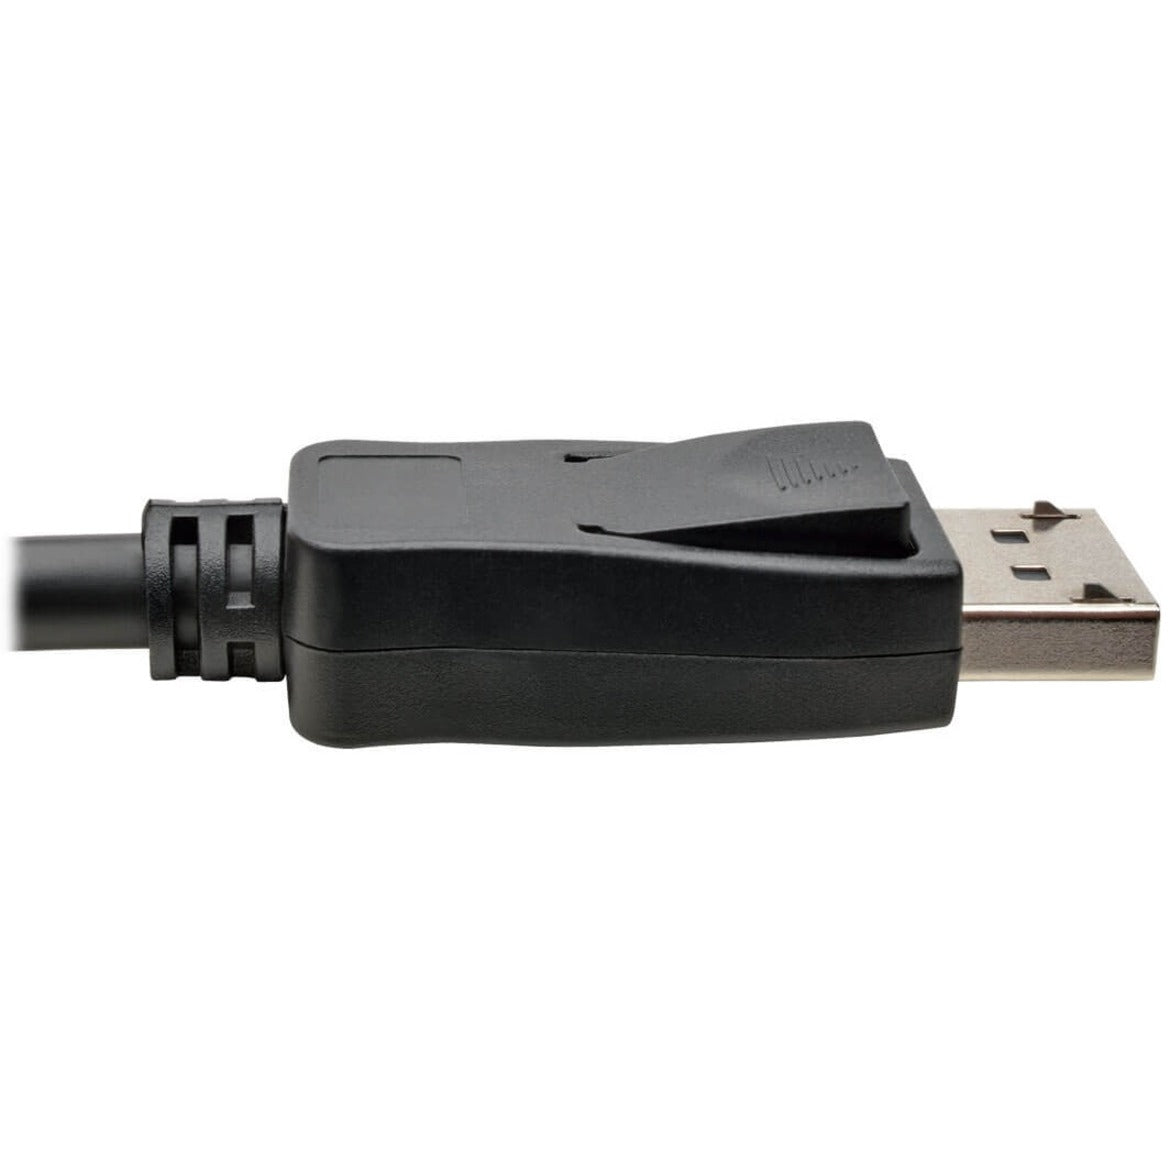 Tripp Lite P582-010-HD-V2A DisplayPort 1.2a to HDMI Active Adapter Cable (M/M), 10 ft.